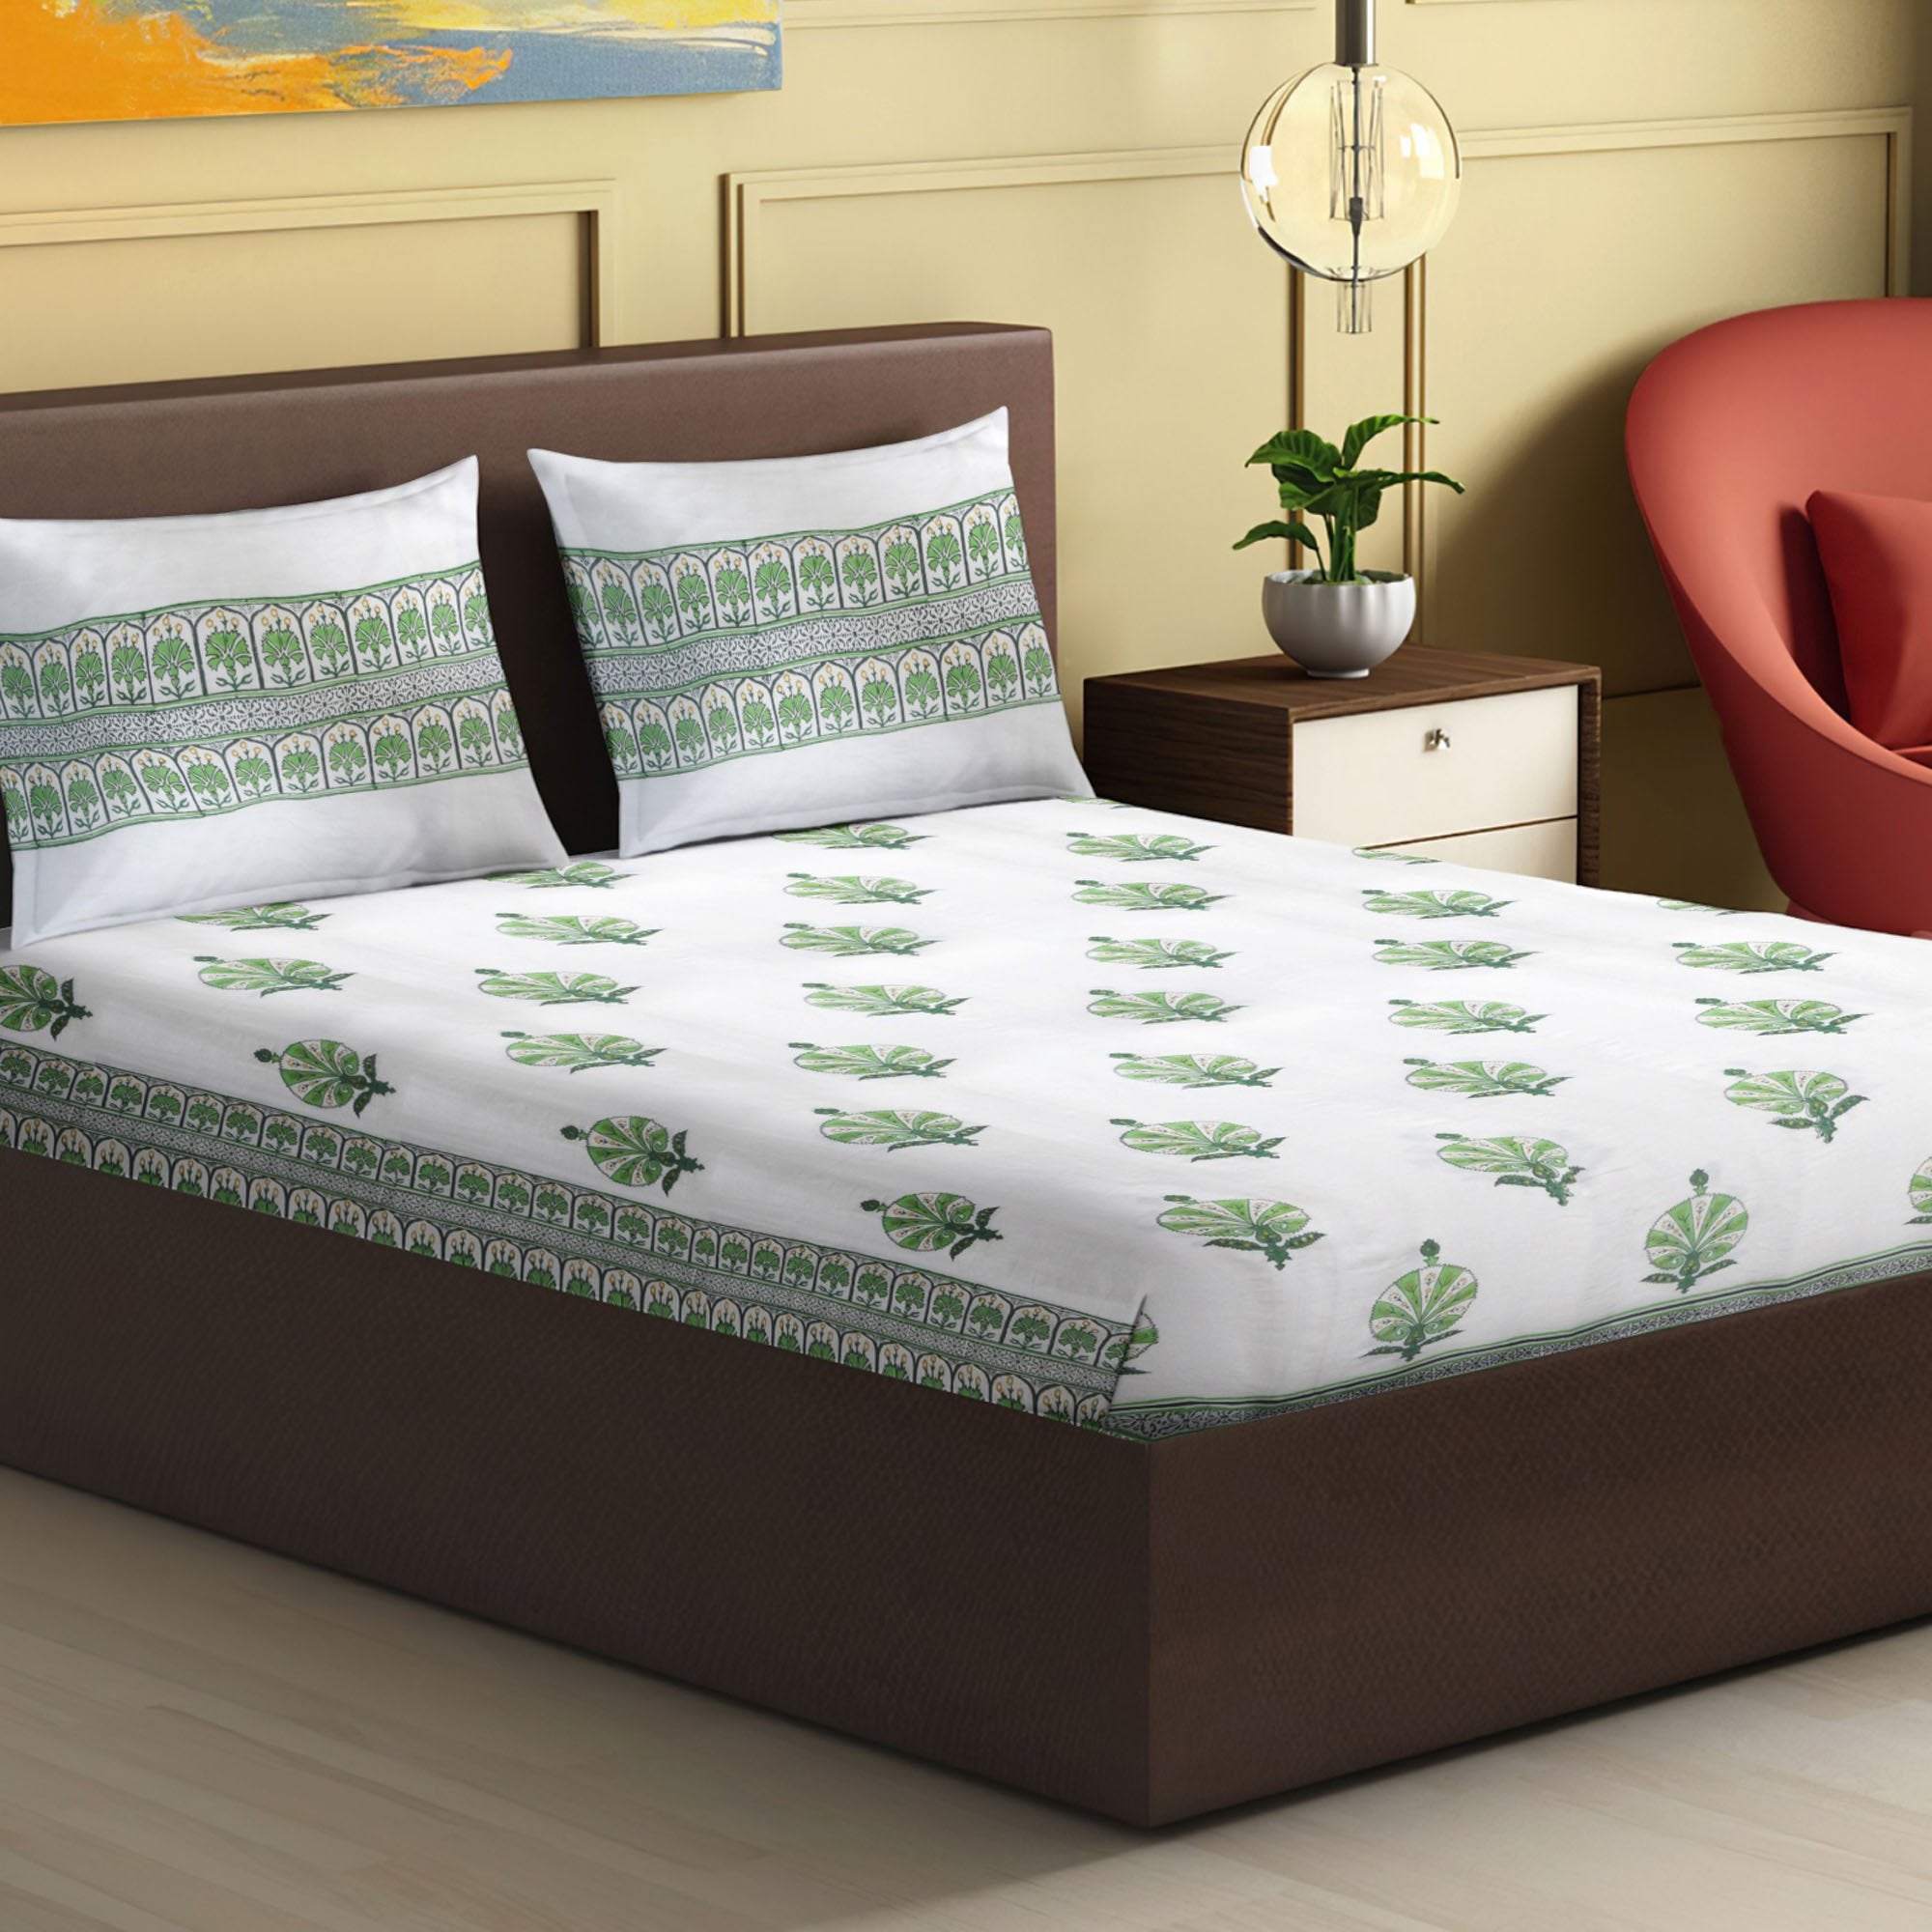 100% Handmade  Ethnic pattern sanganeri Block Print King Size Bedsheets comes  with 2 Pillow covers.